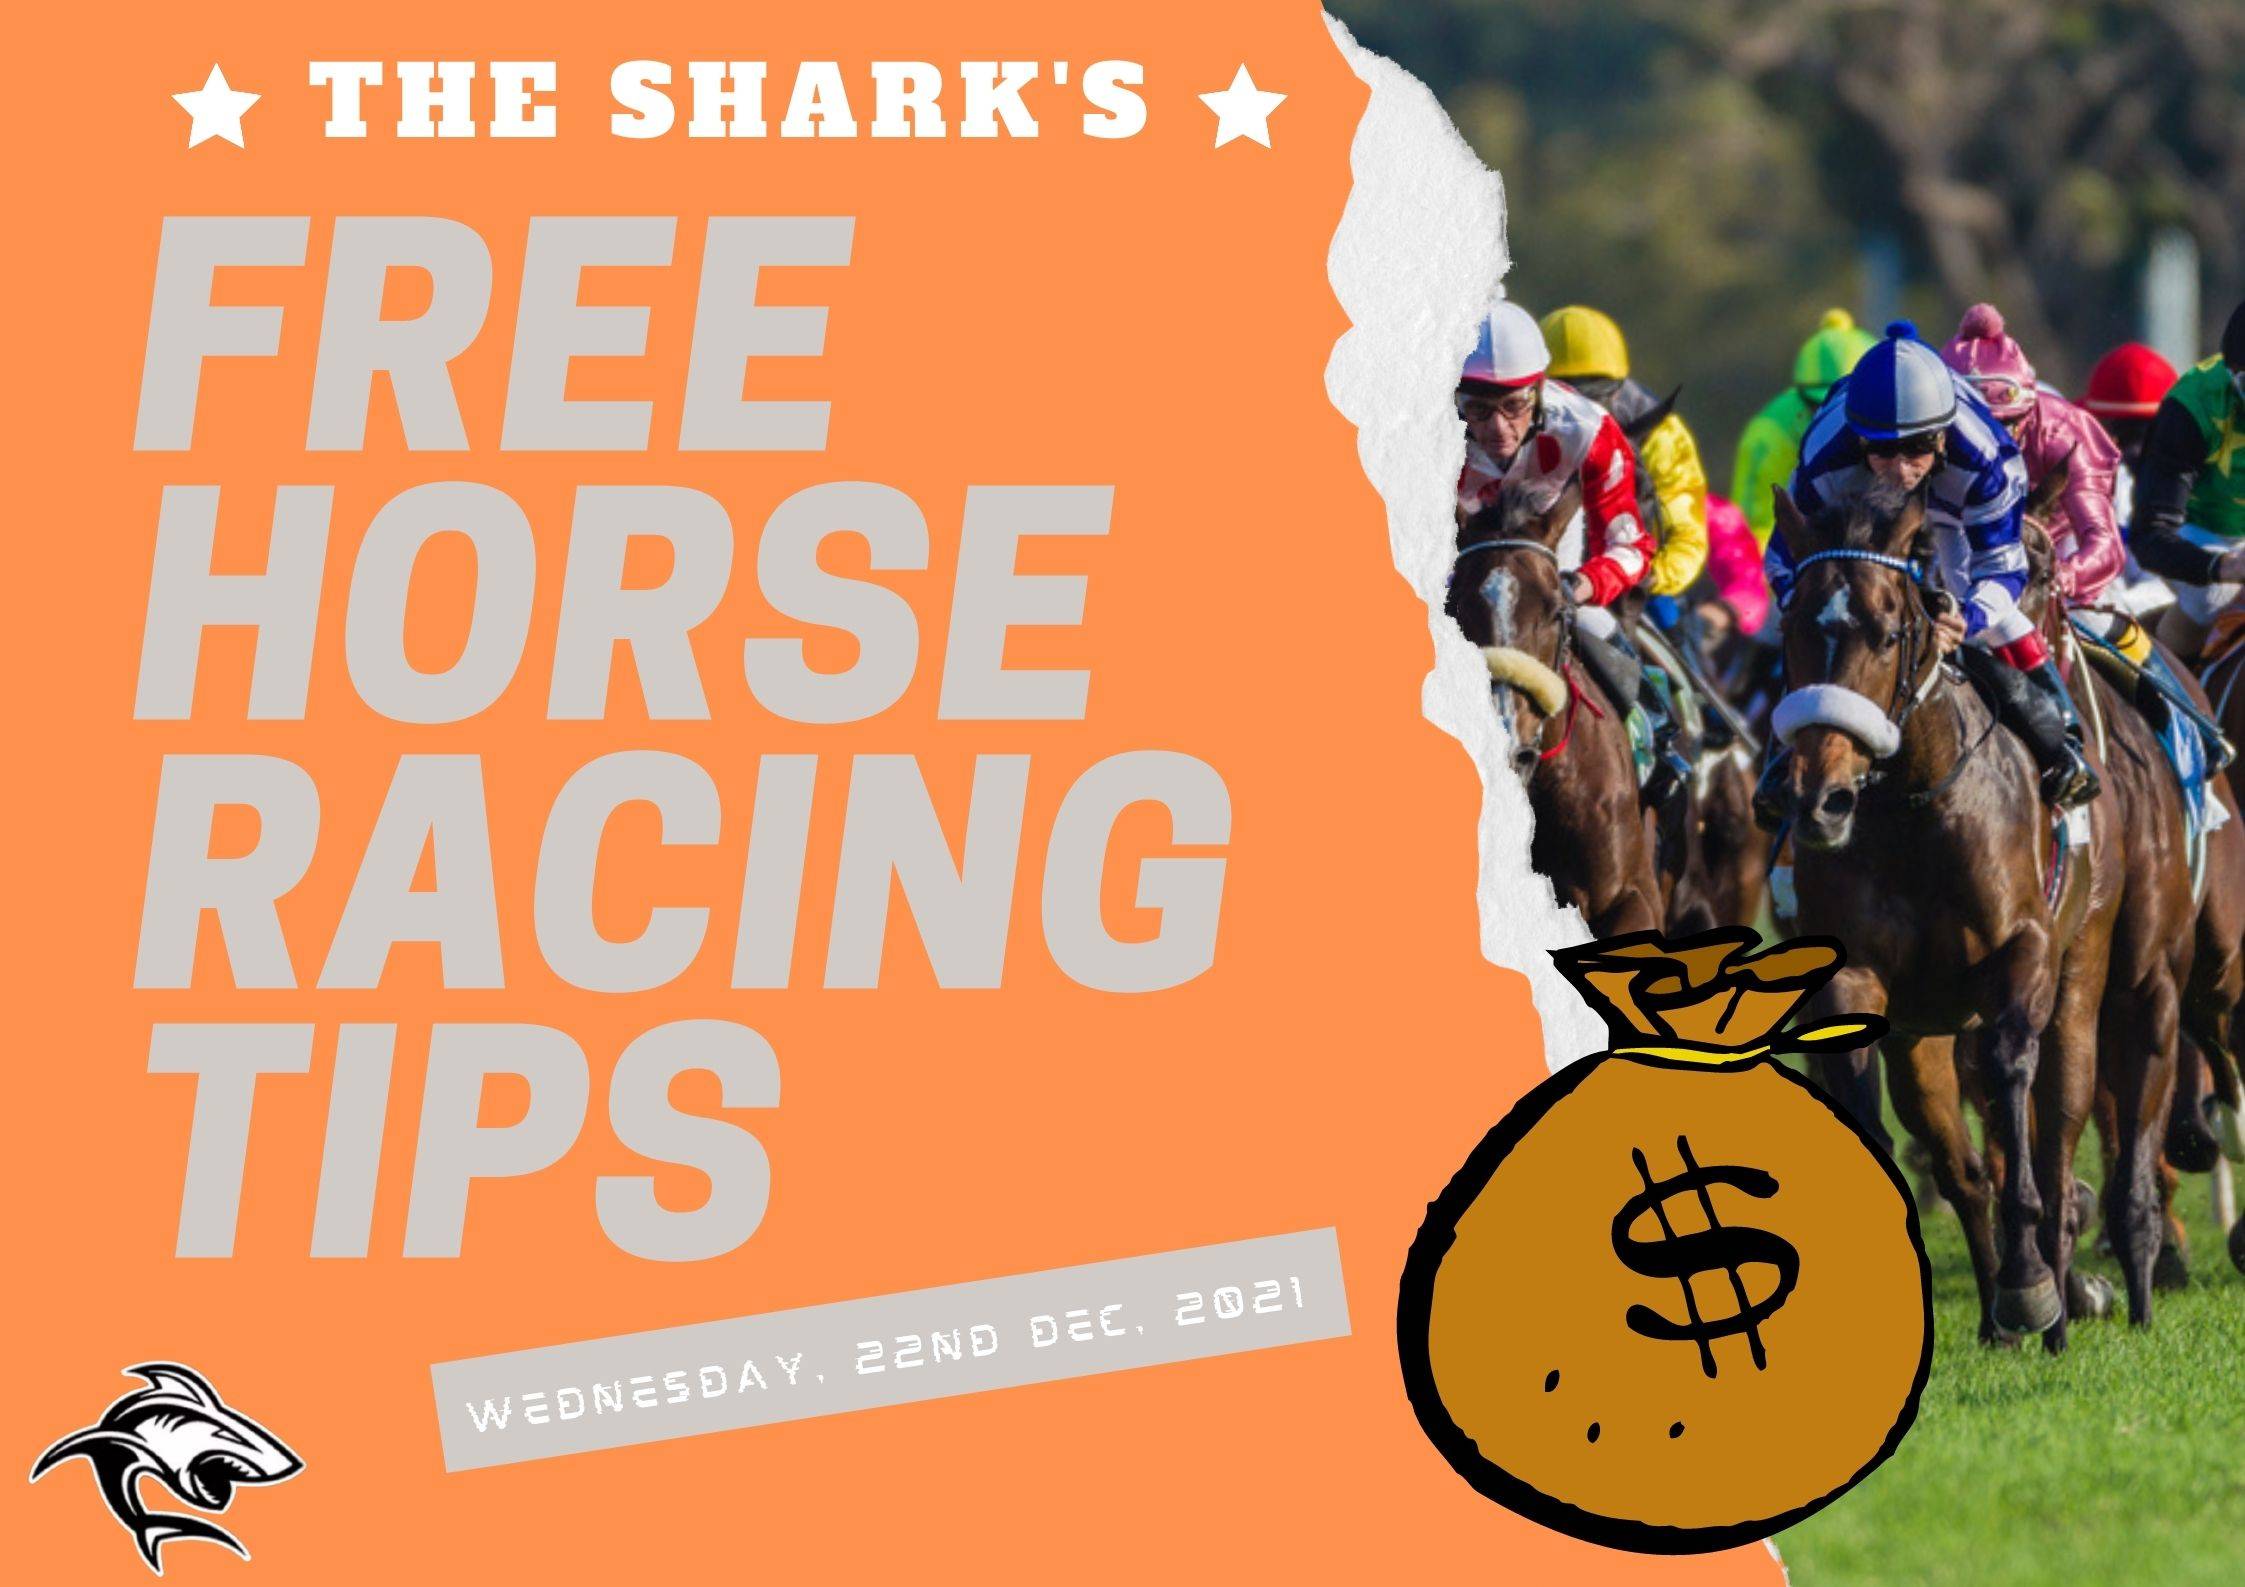 Free Horse Racing Tips - 22nd Dec